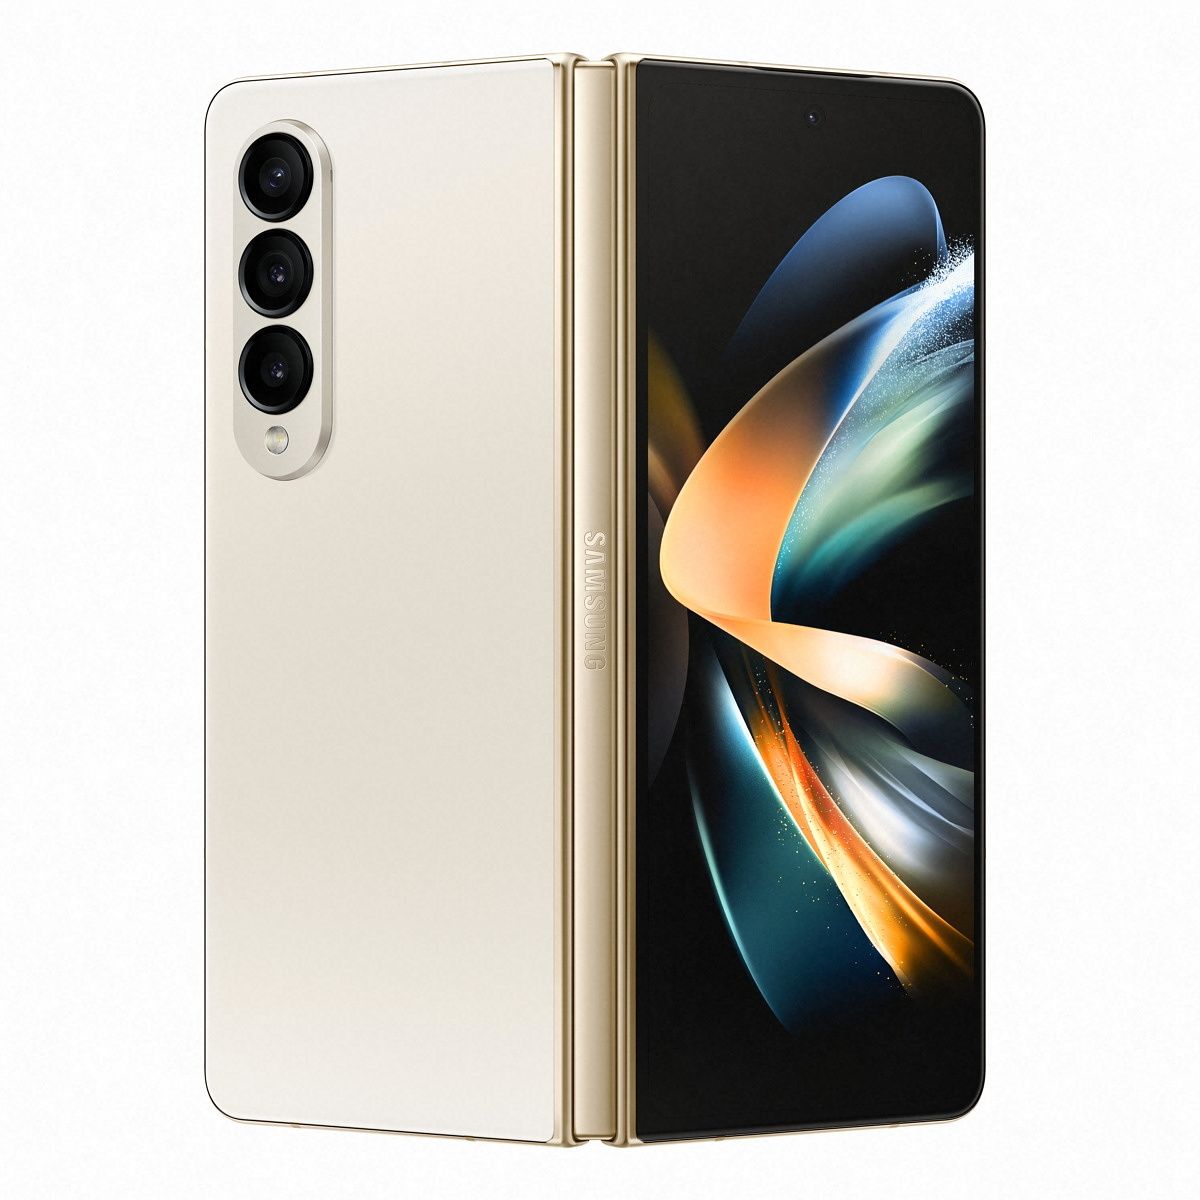 The Galaxy Z Fold 4 brings back all the great things about the Fold 3, plus a much better camera system, a slightly wider outside screen, and smarter software. 